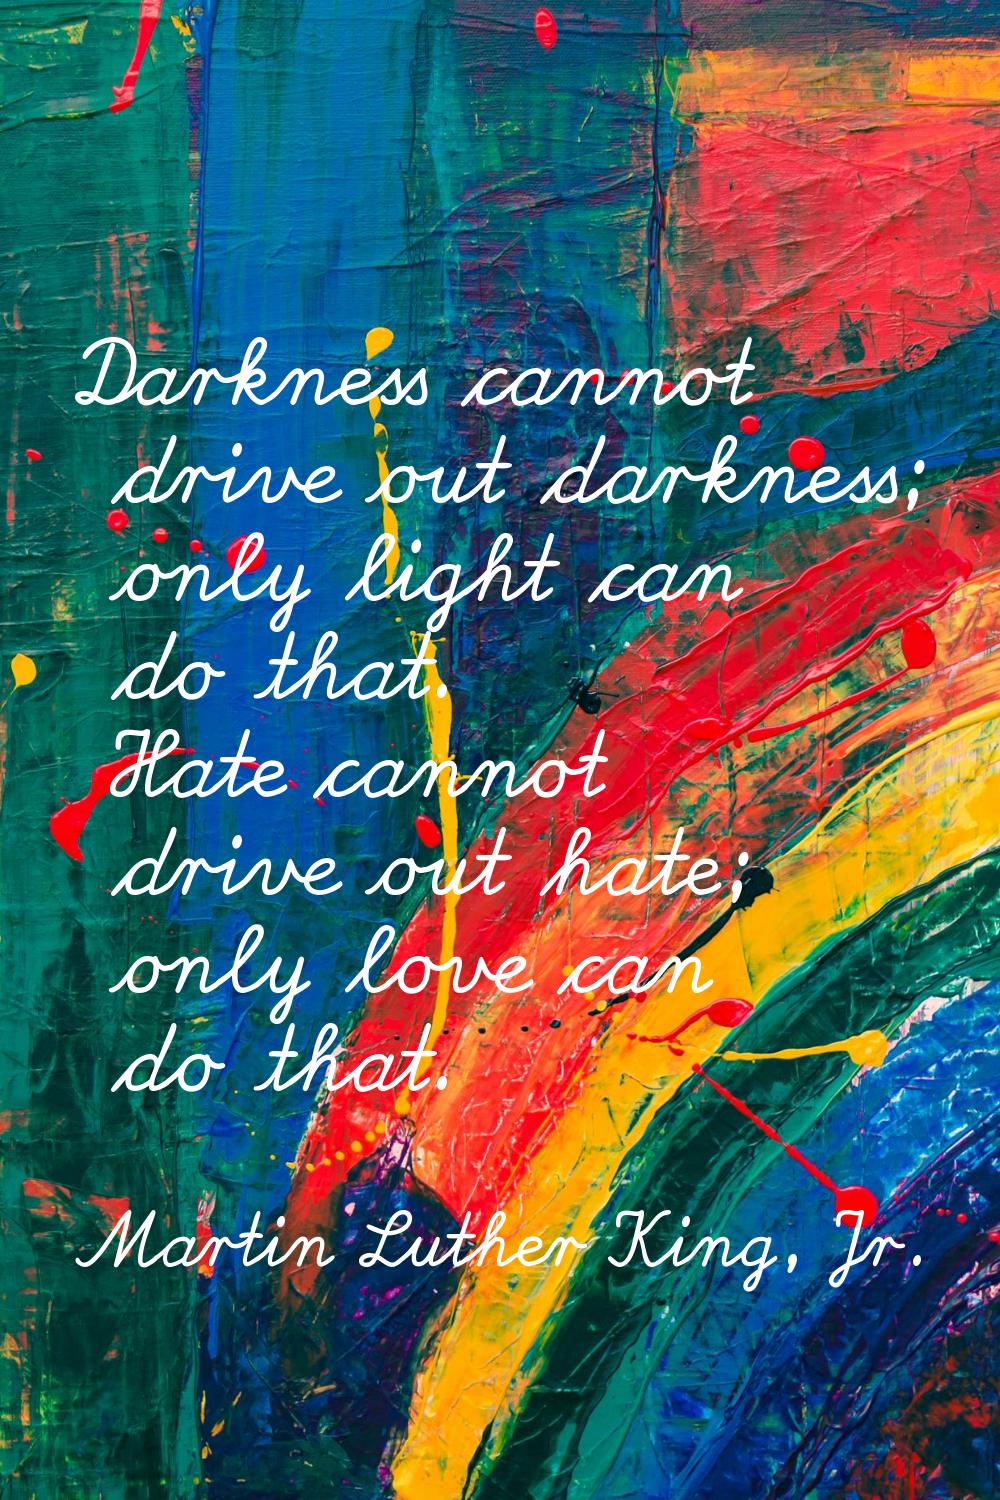 Darkness cannot drive out darkness; only light can do that. Hate cannot drive out hate; only love c